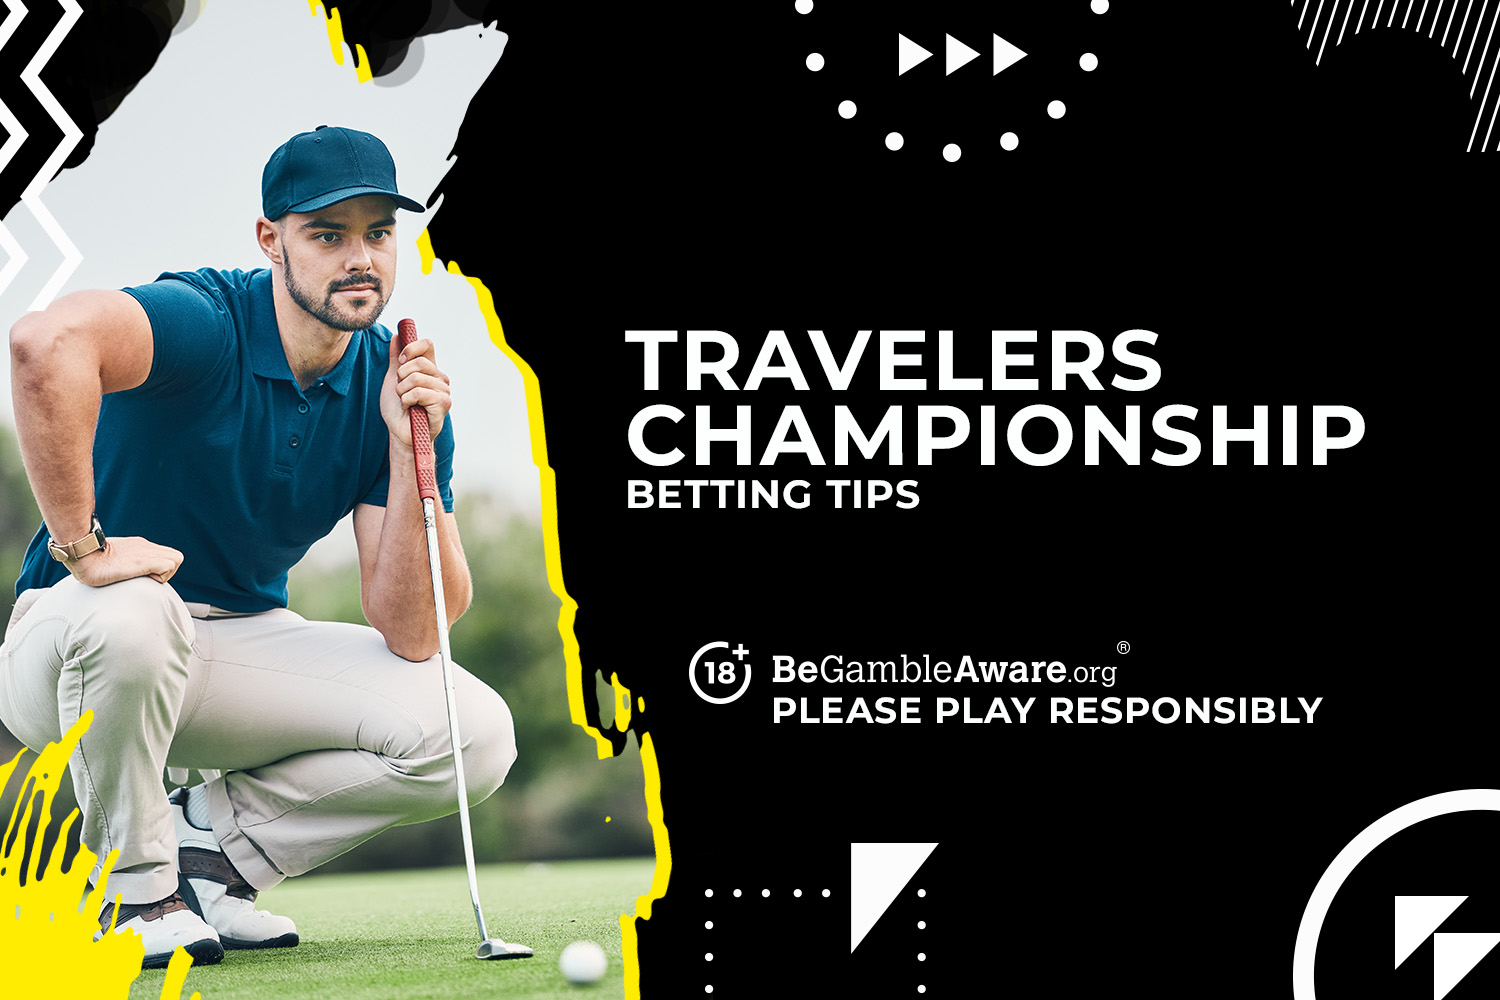 Photo: golf betting tips travellers